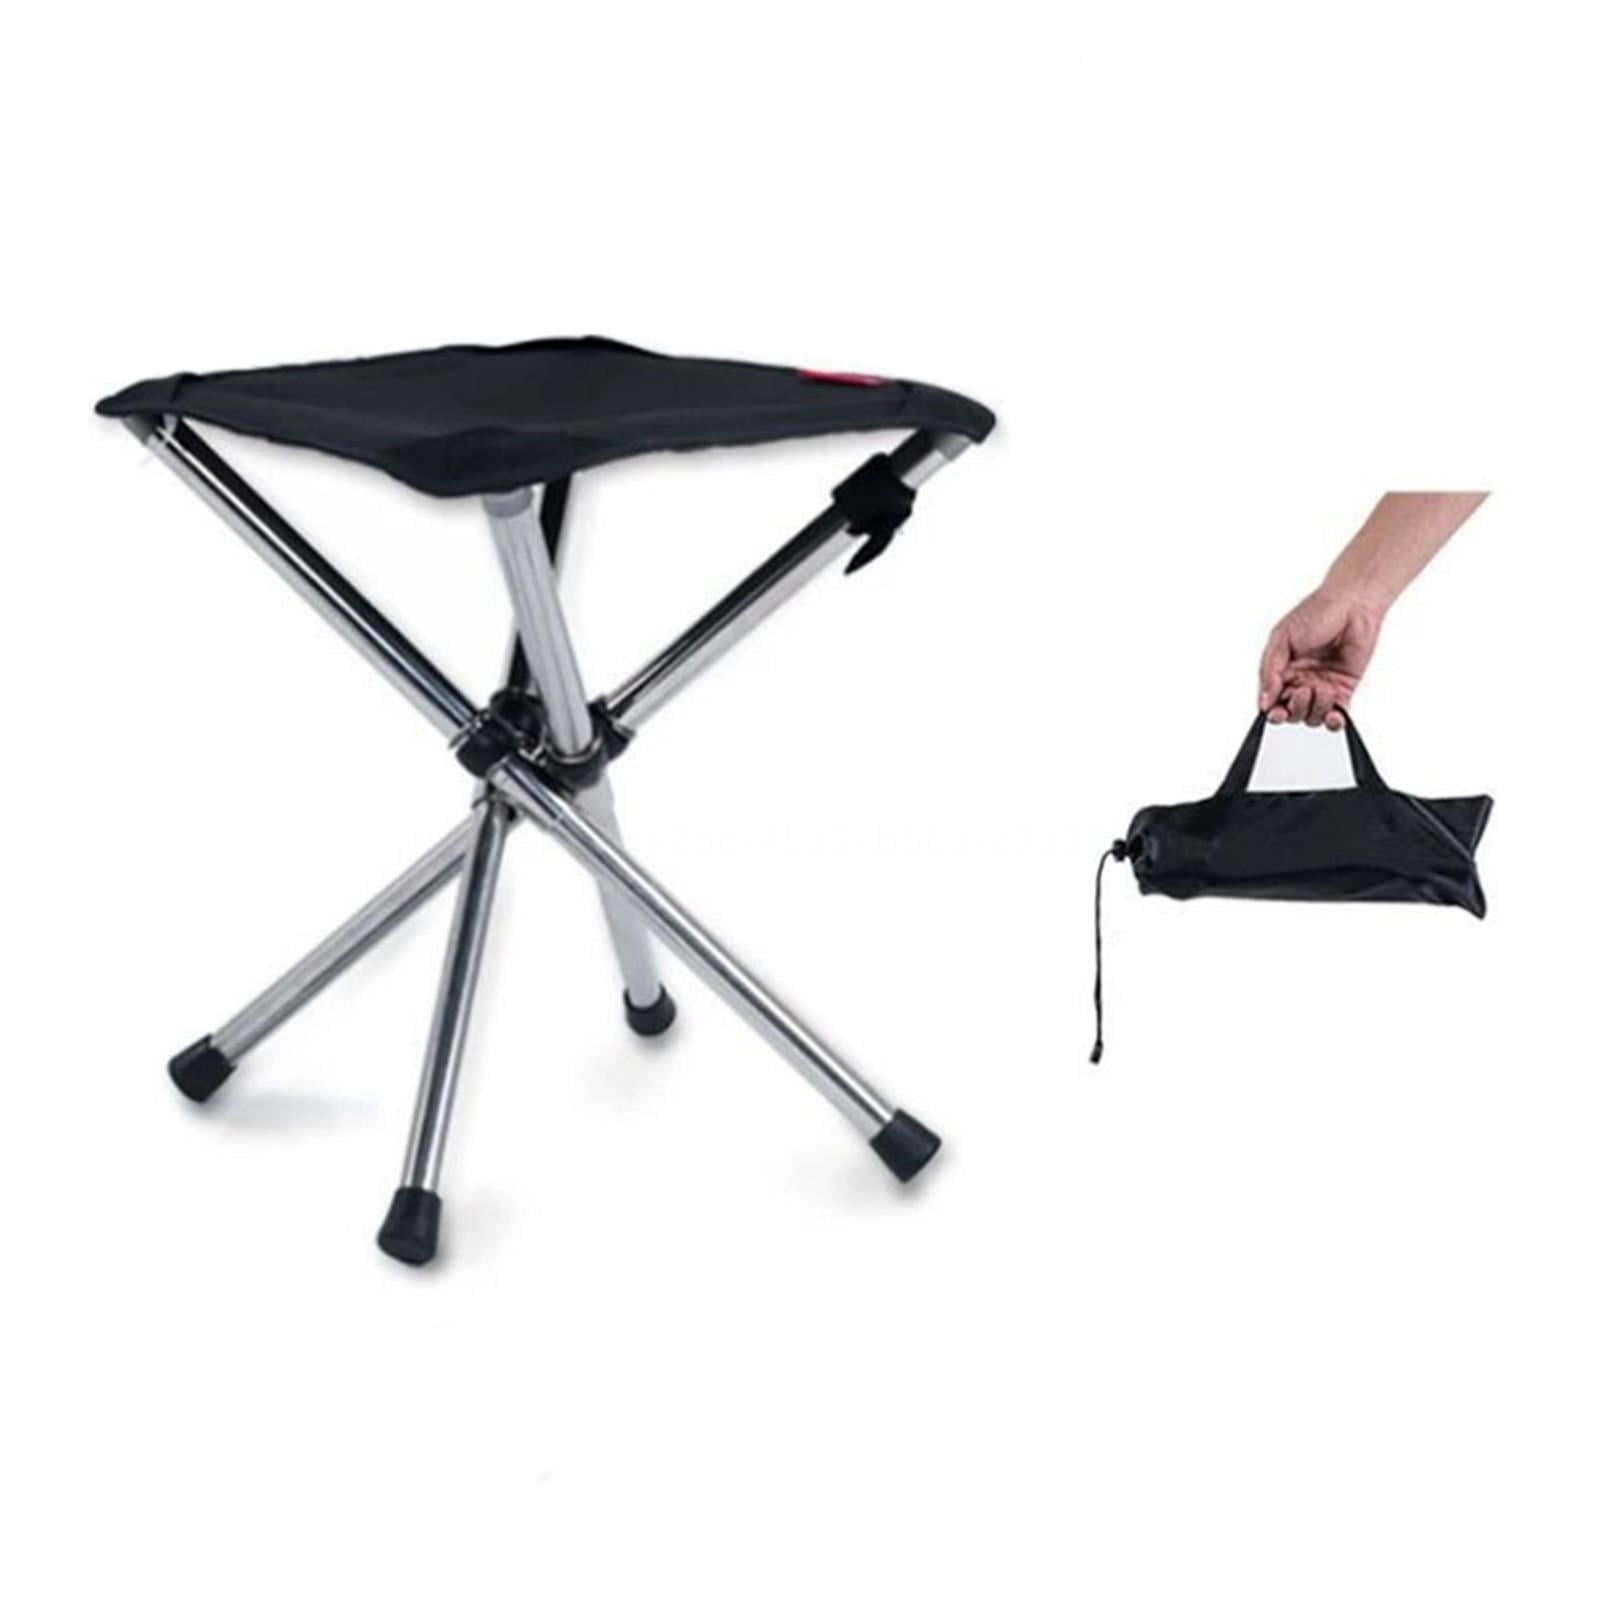 KingCamp Mini Folding Camping Stool Small Protable Slaker Backpacking Chair with Carry Bag 